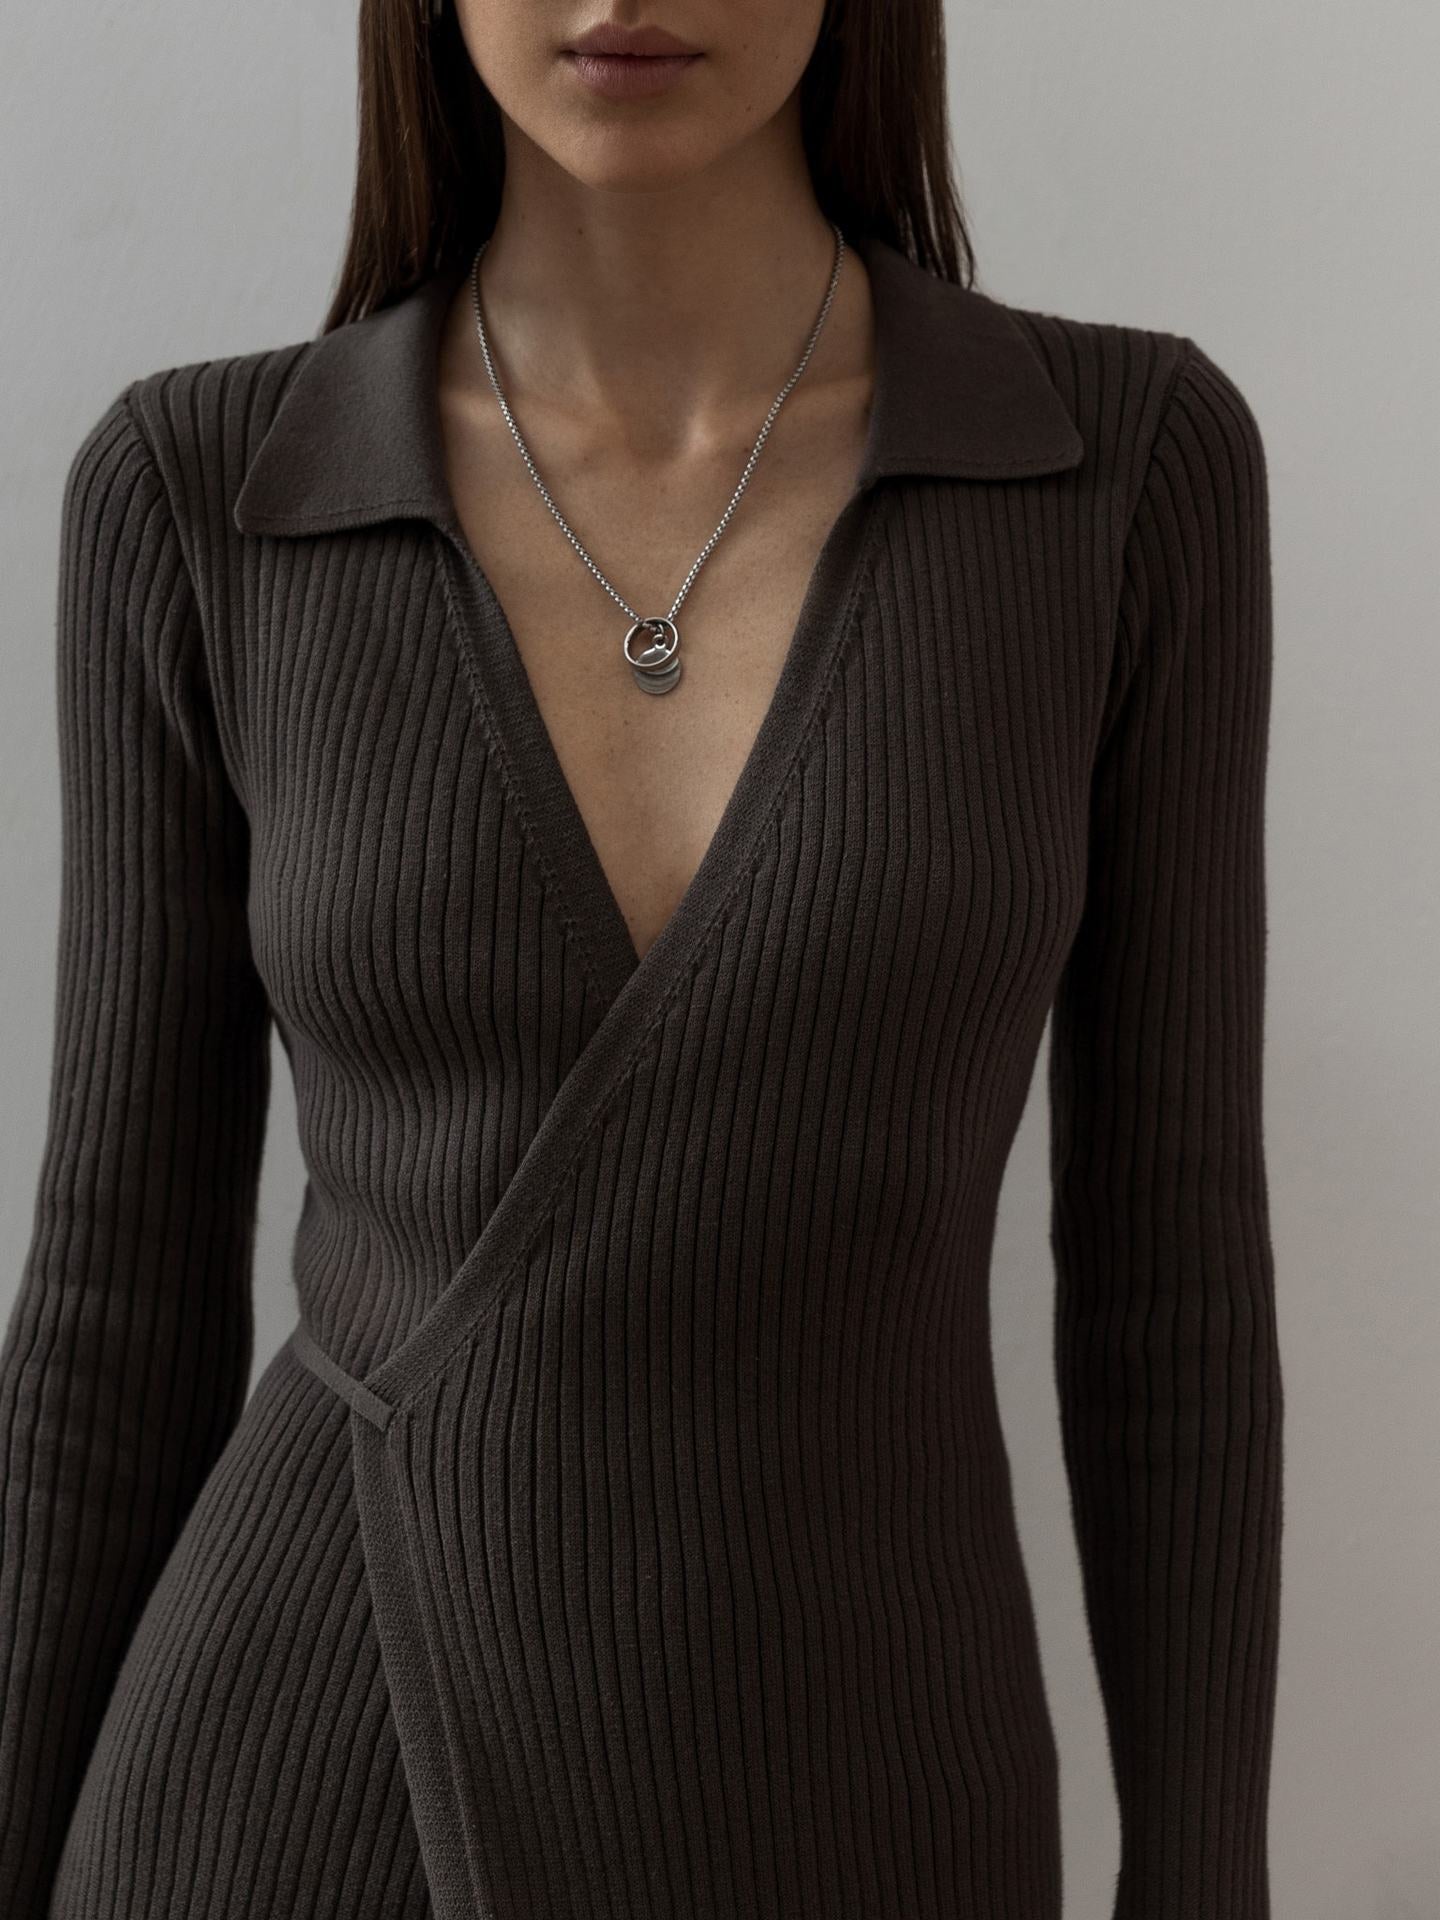 Sexy Polo Neckline Tight Knitted Dresses